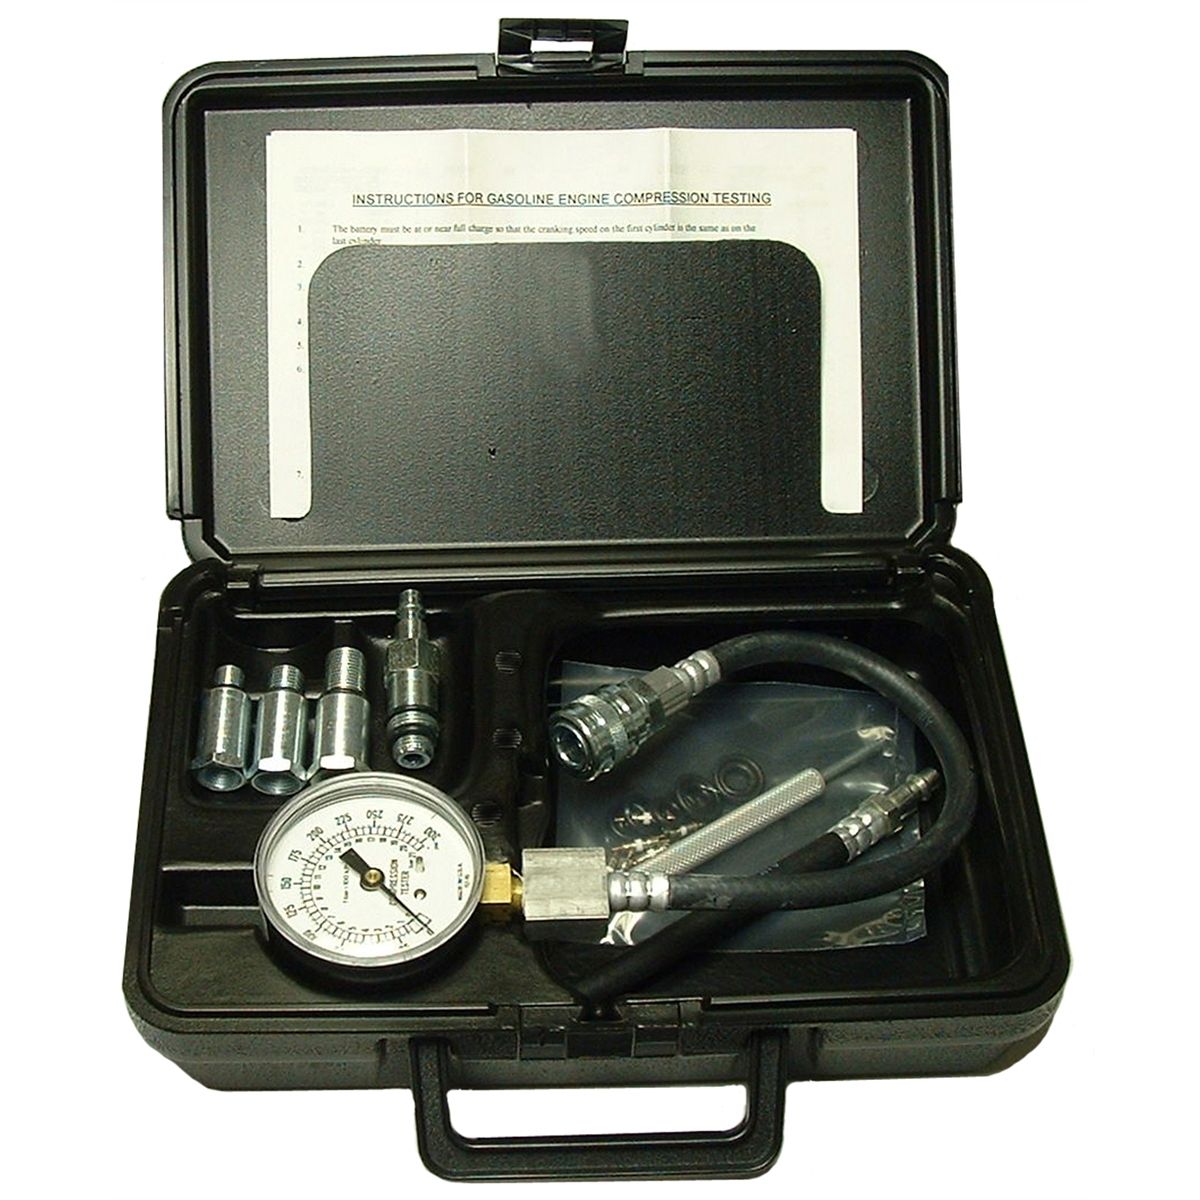 Heavy Duty Compression Tester For Gasoline Engine w/Case